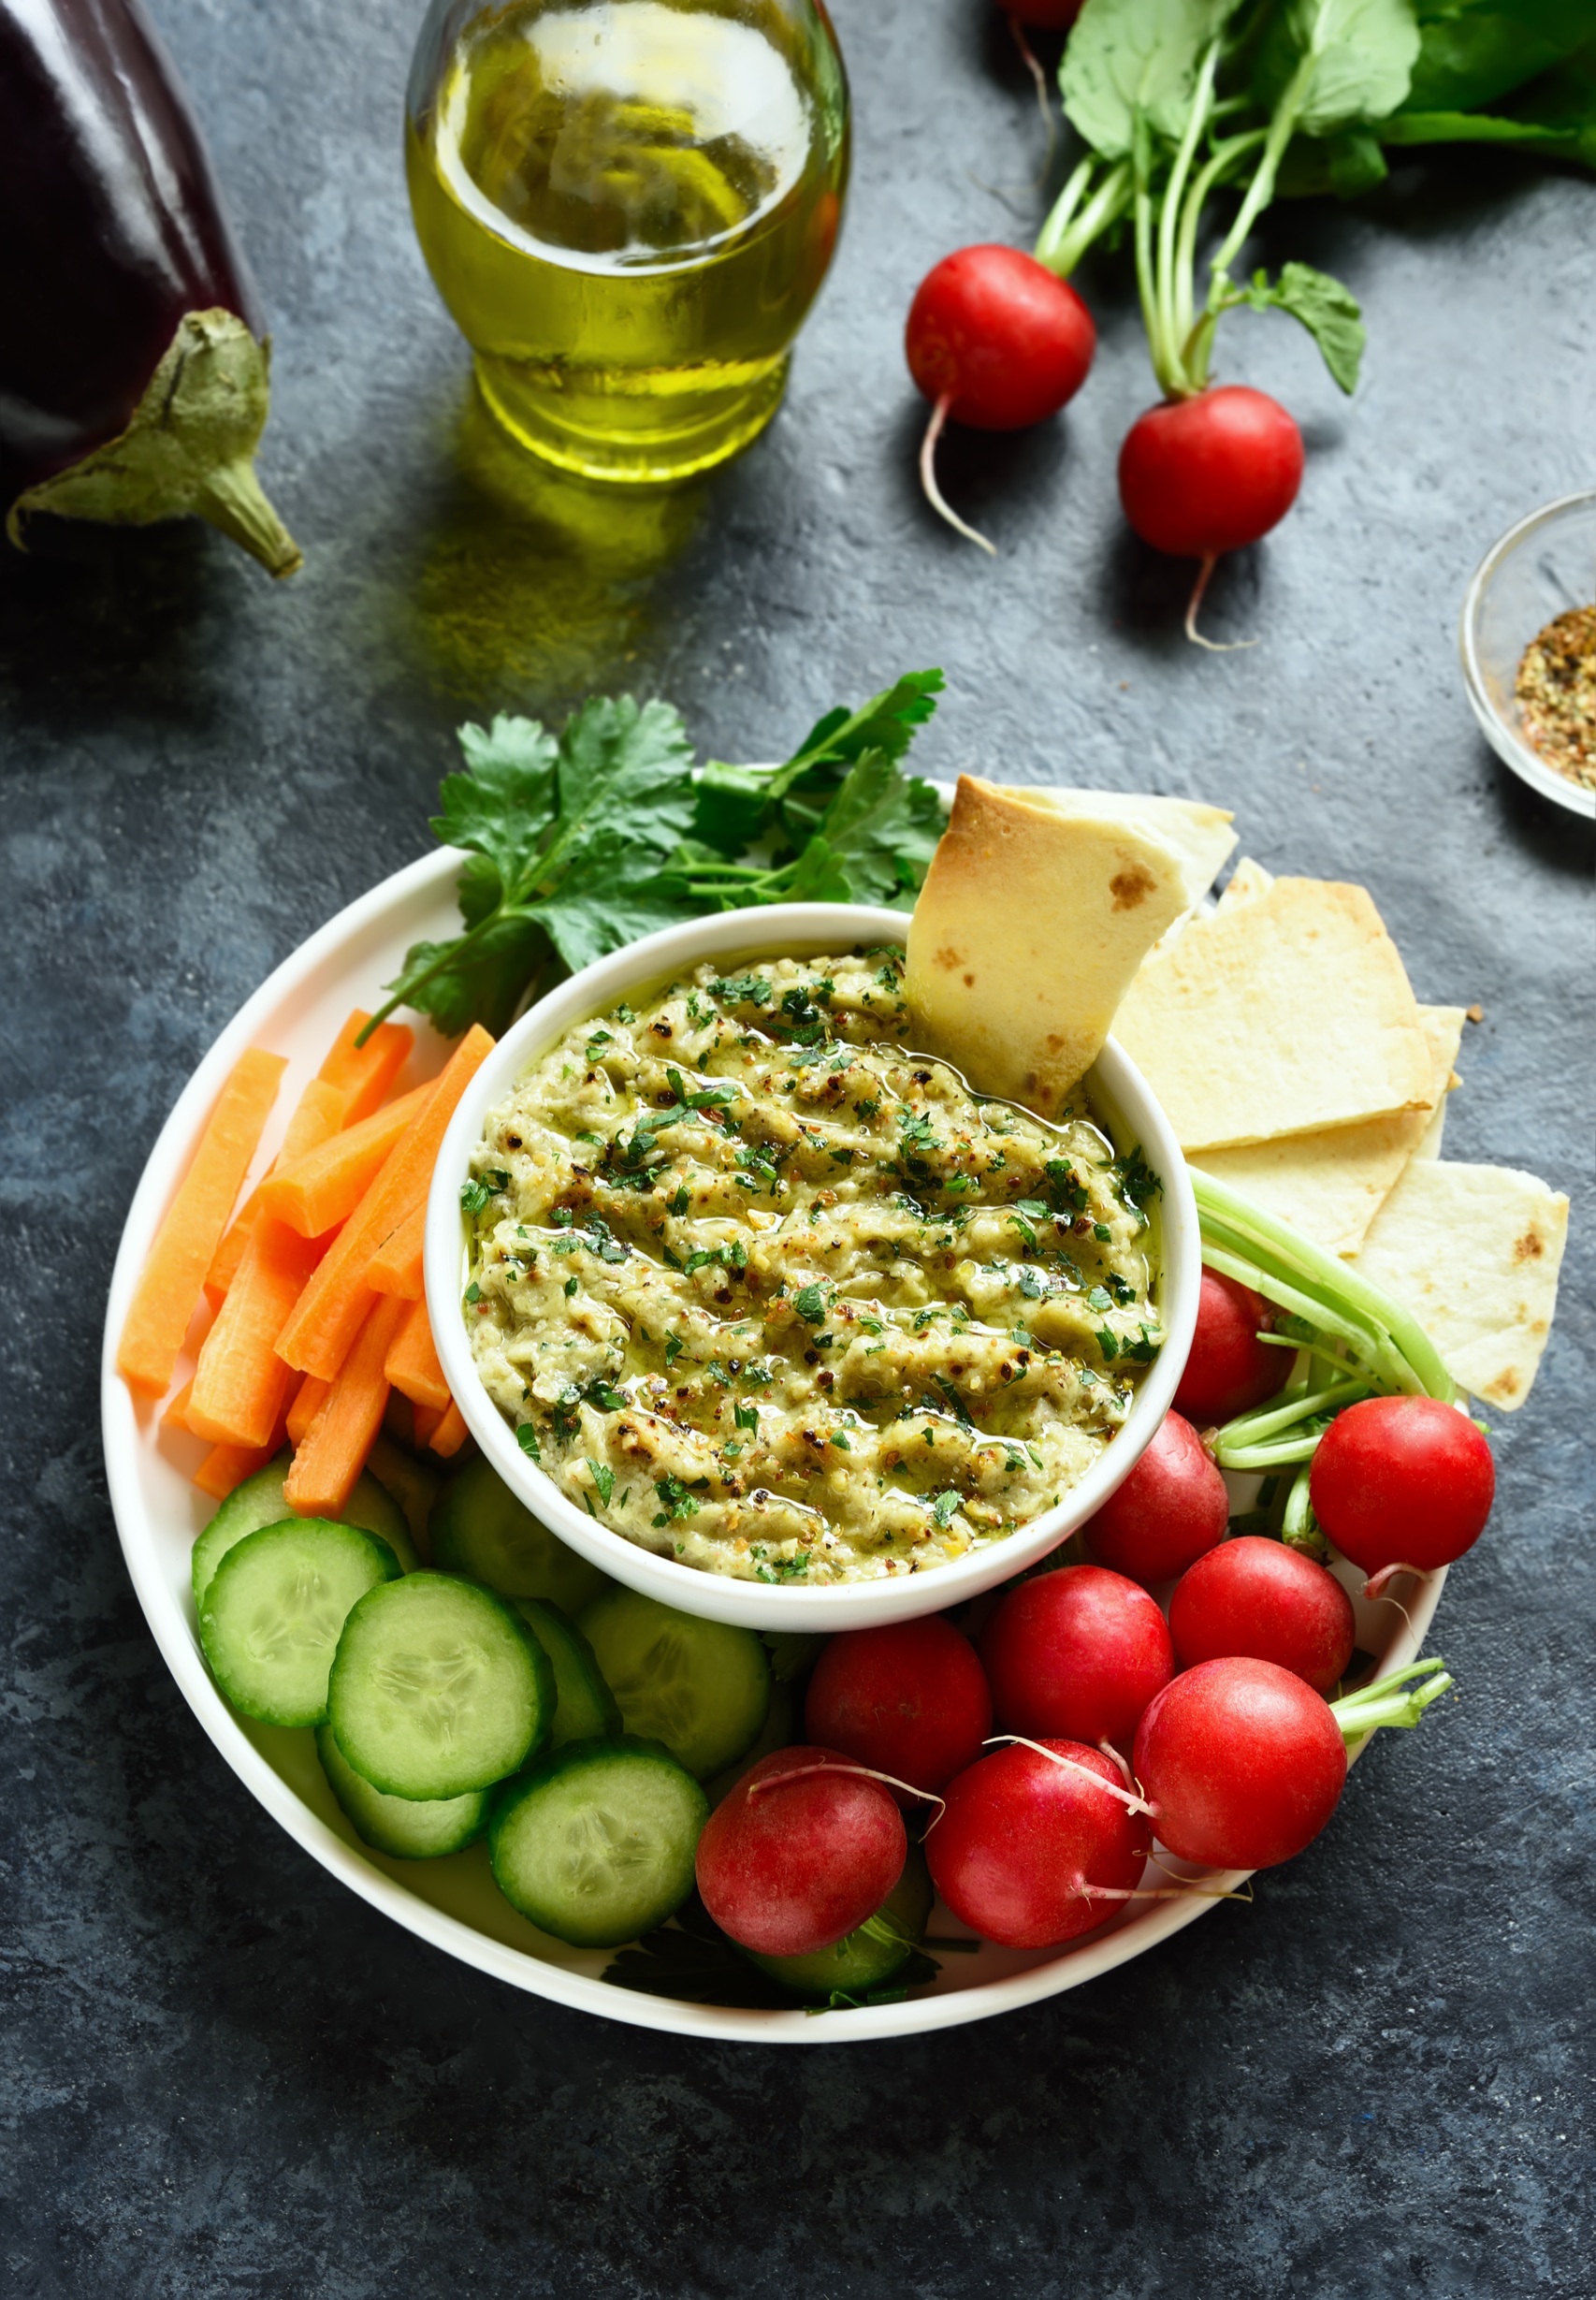 Roasted eggplant dip, a balanced snack you can meal prep a week ahead. https://www.info-on-high-blood-pressure.com/balanced-snacks-for-the-week.html